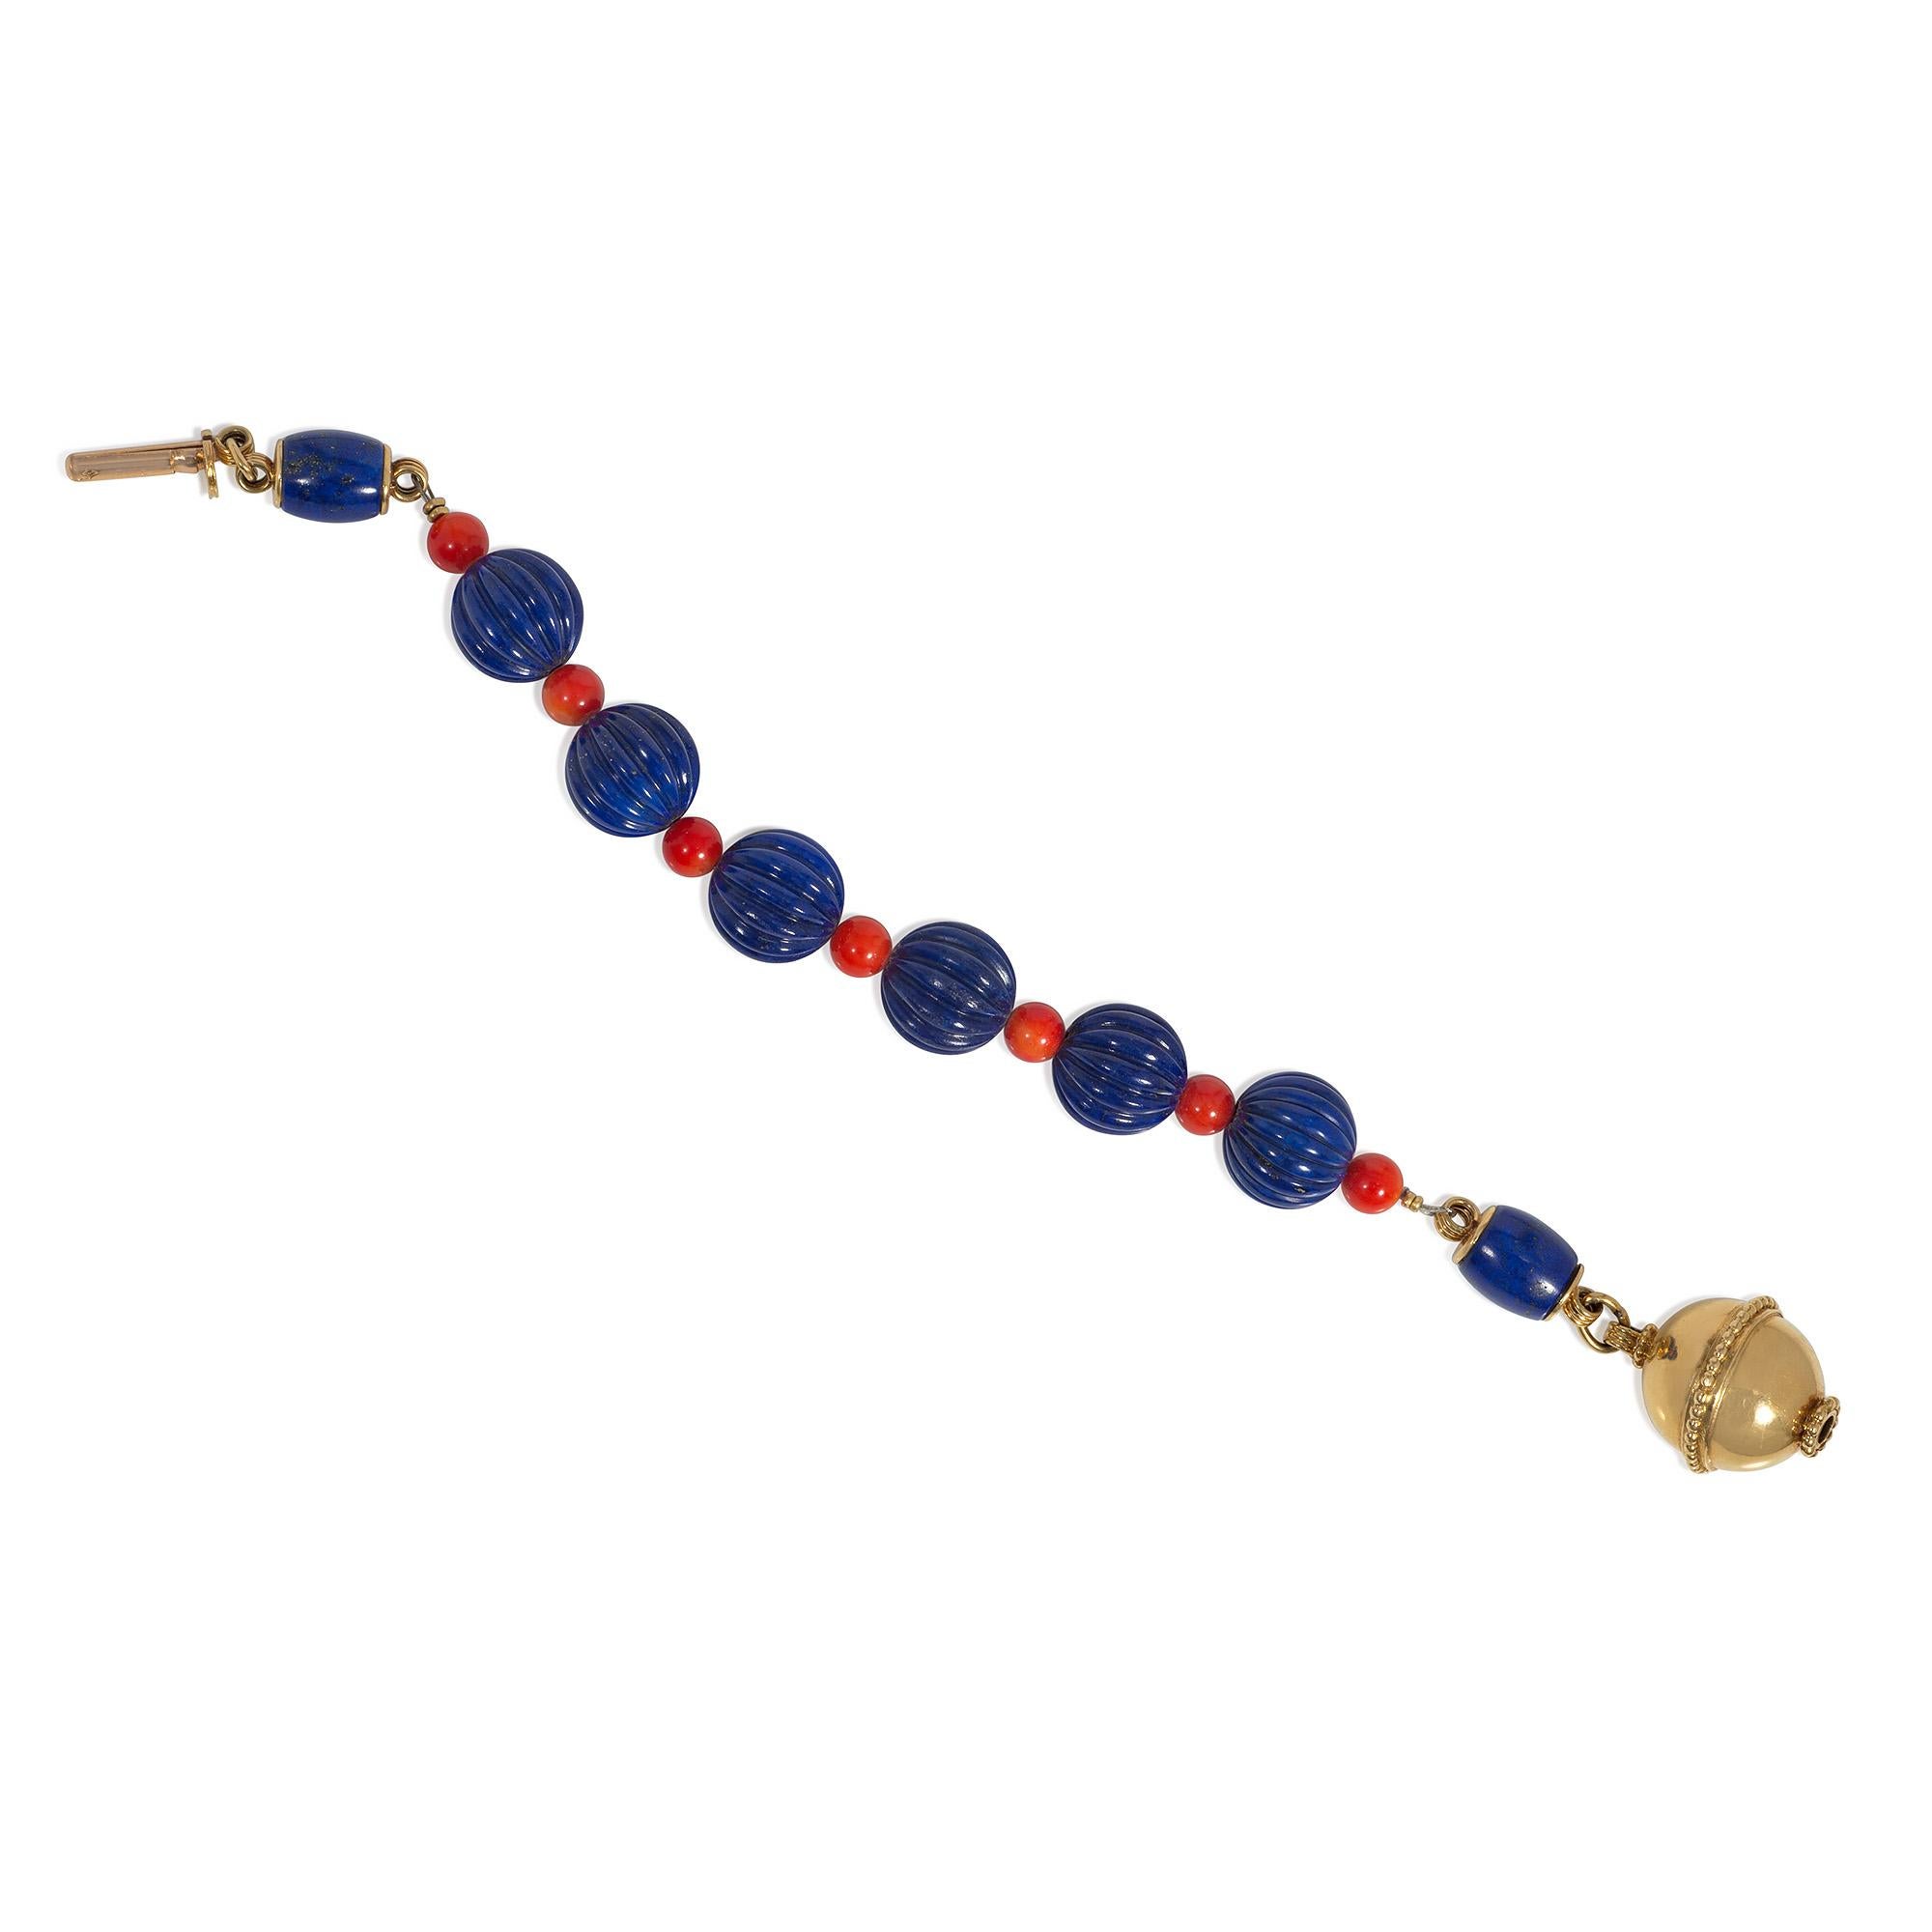 A mid-century lapis, coral, and gold bracelet comprised of fluted lapis beads alternating with smaller red-orange coral beads, terminating in barrel-shaped lapis links and a granulated gold bead clasp, in 18k.  Cartier, France.  #06636.
Fluted lapis